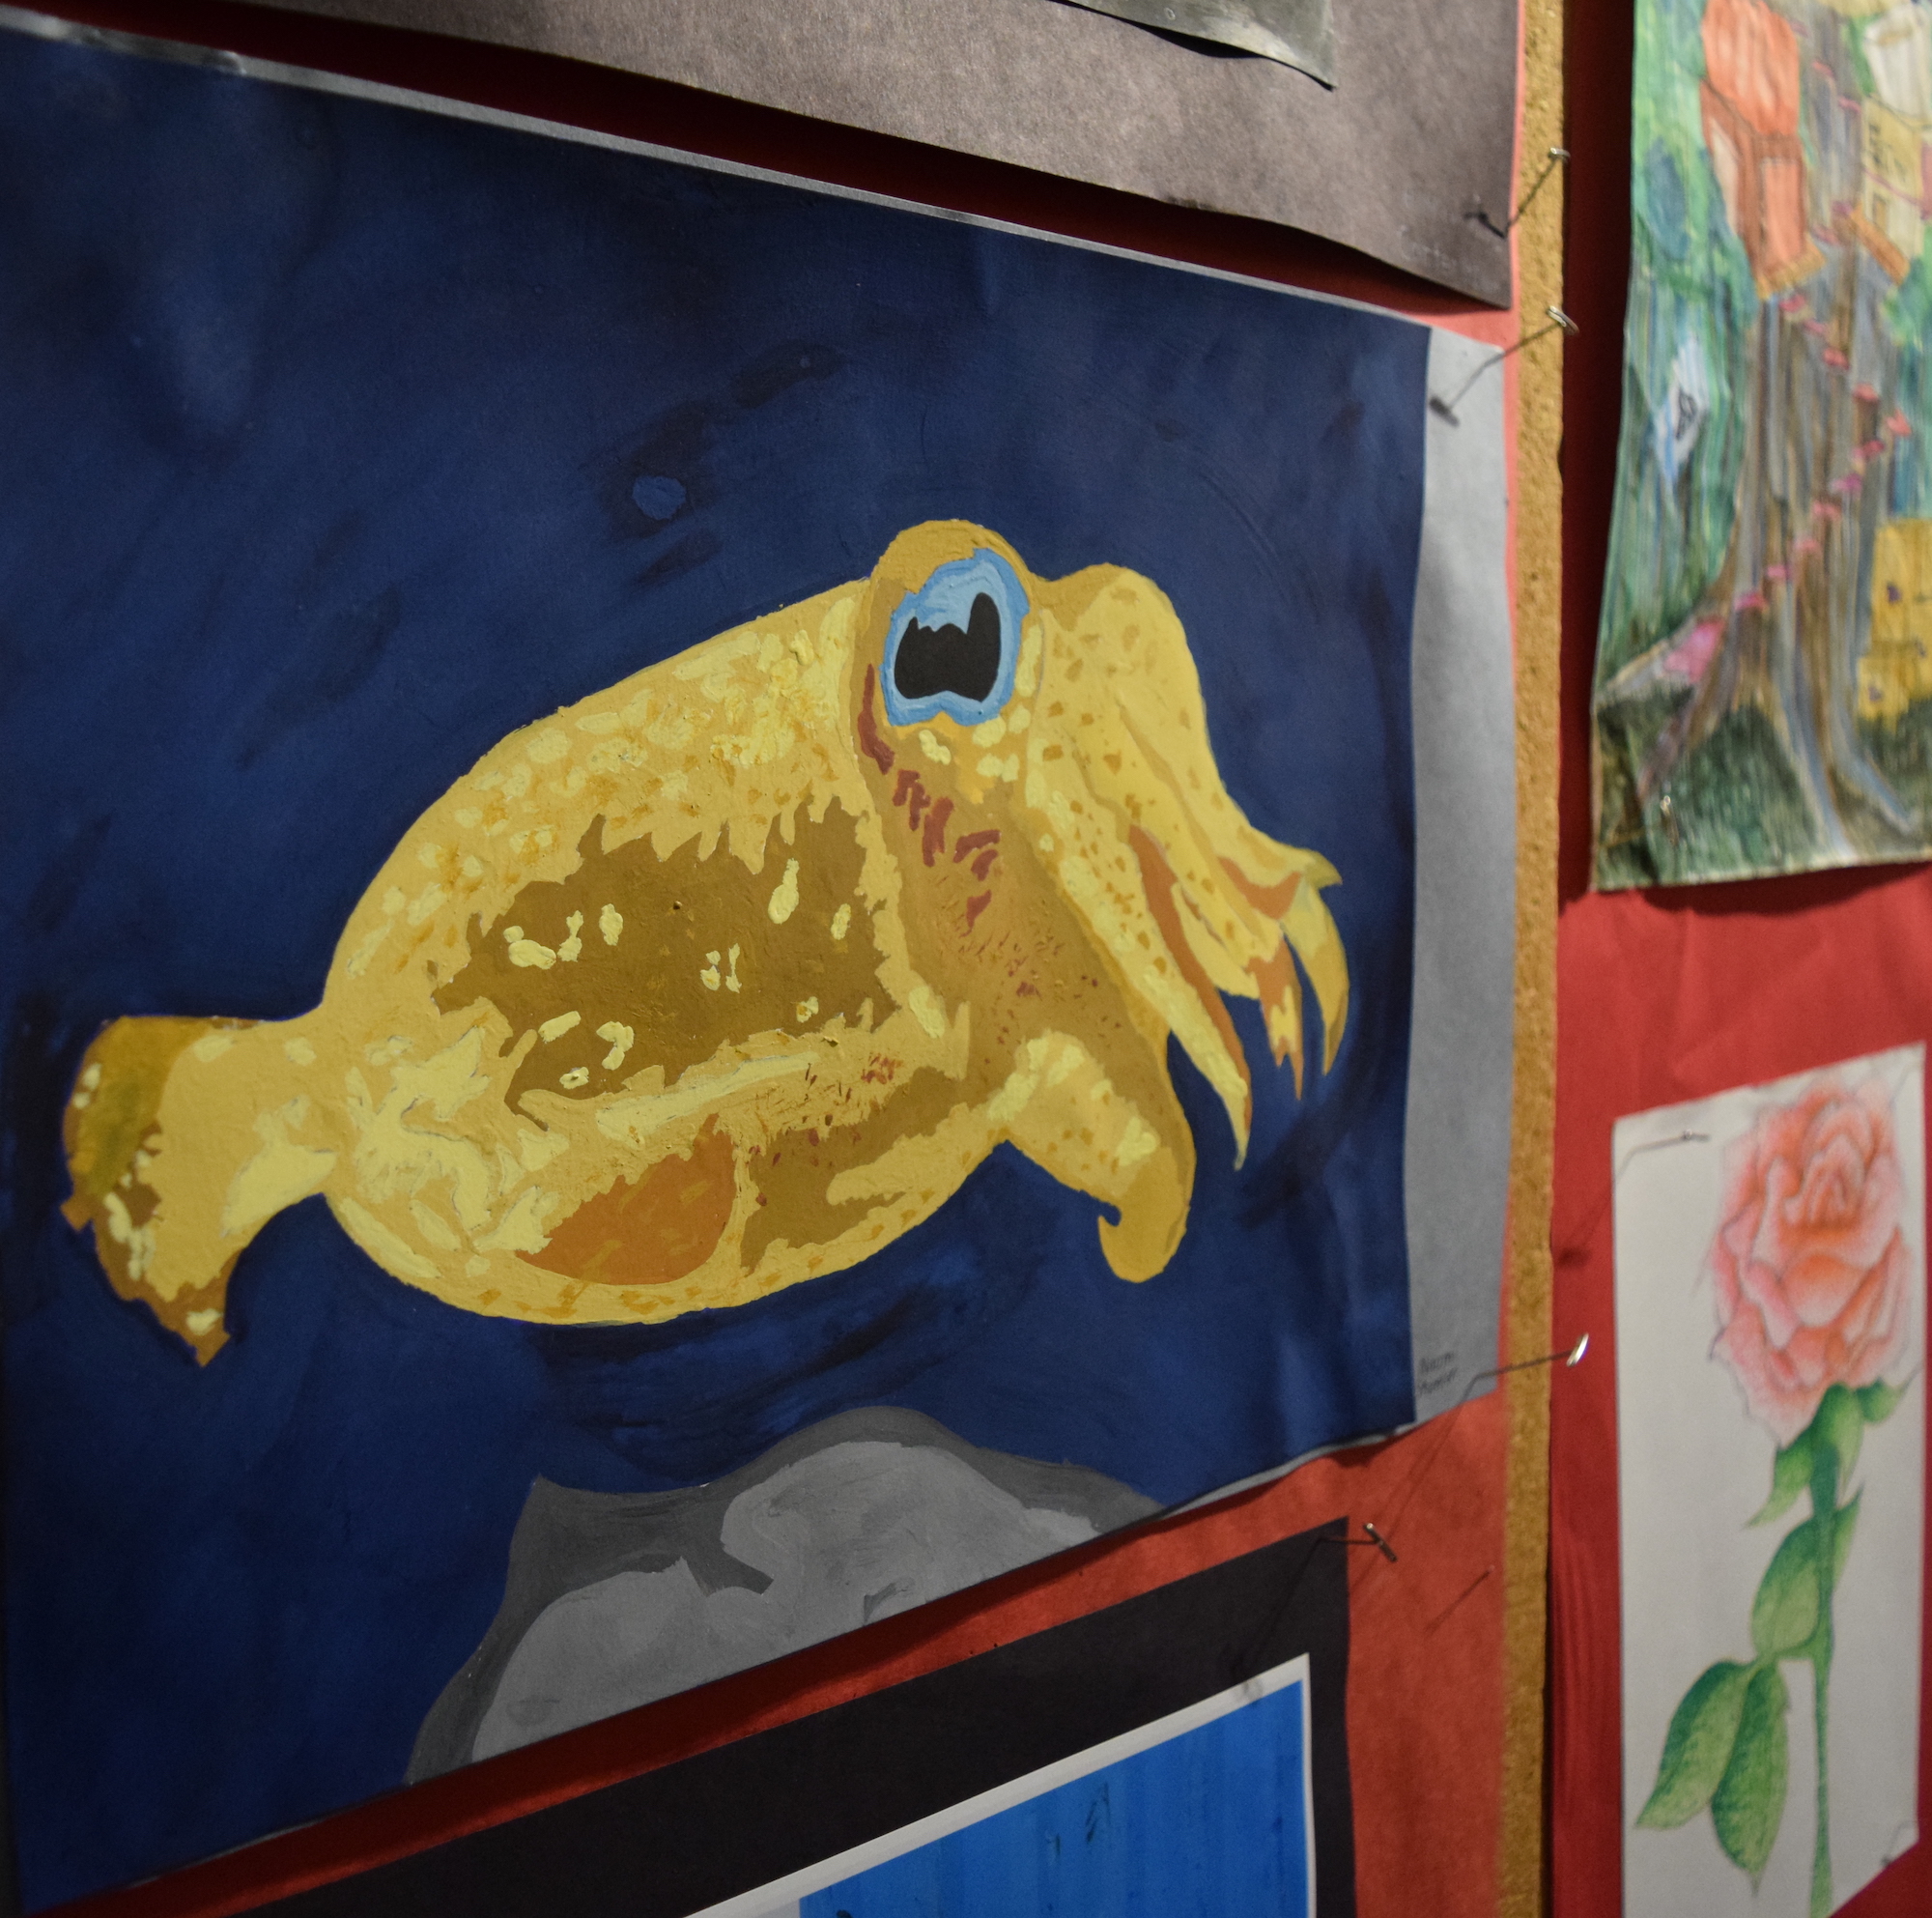 Artwork is displayed at the San Mateo County Office of Education.